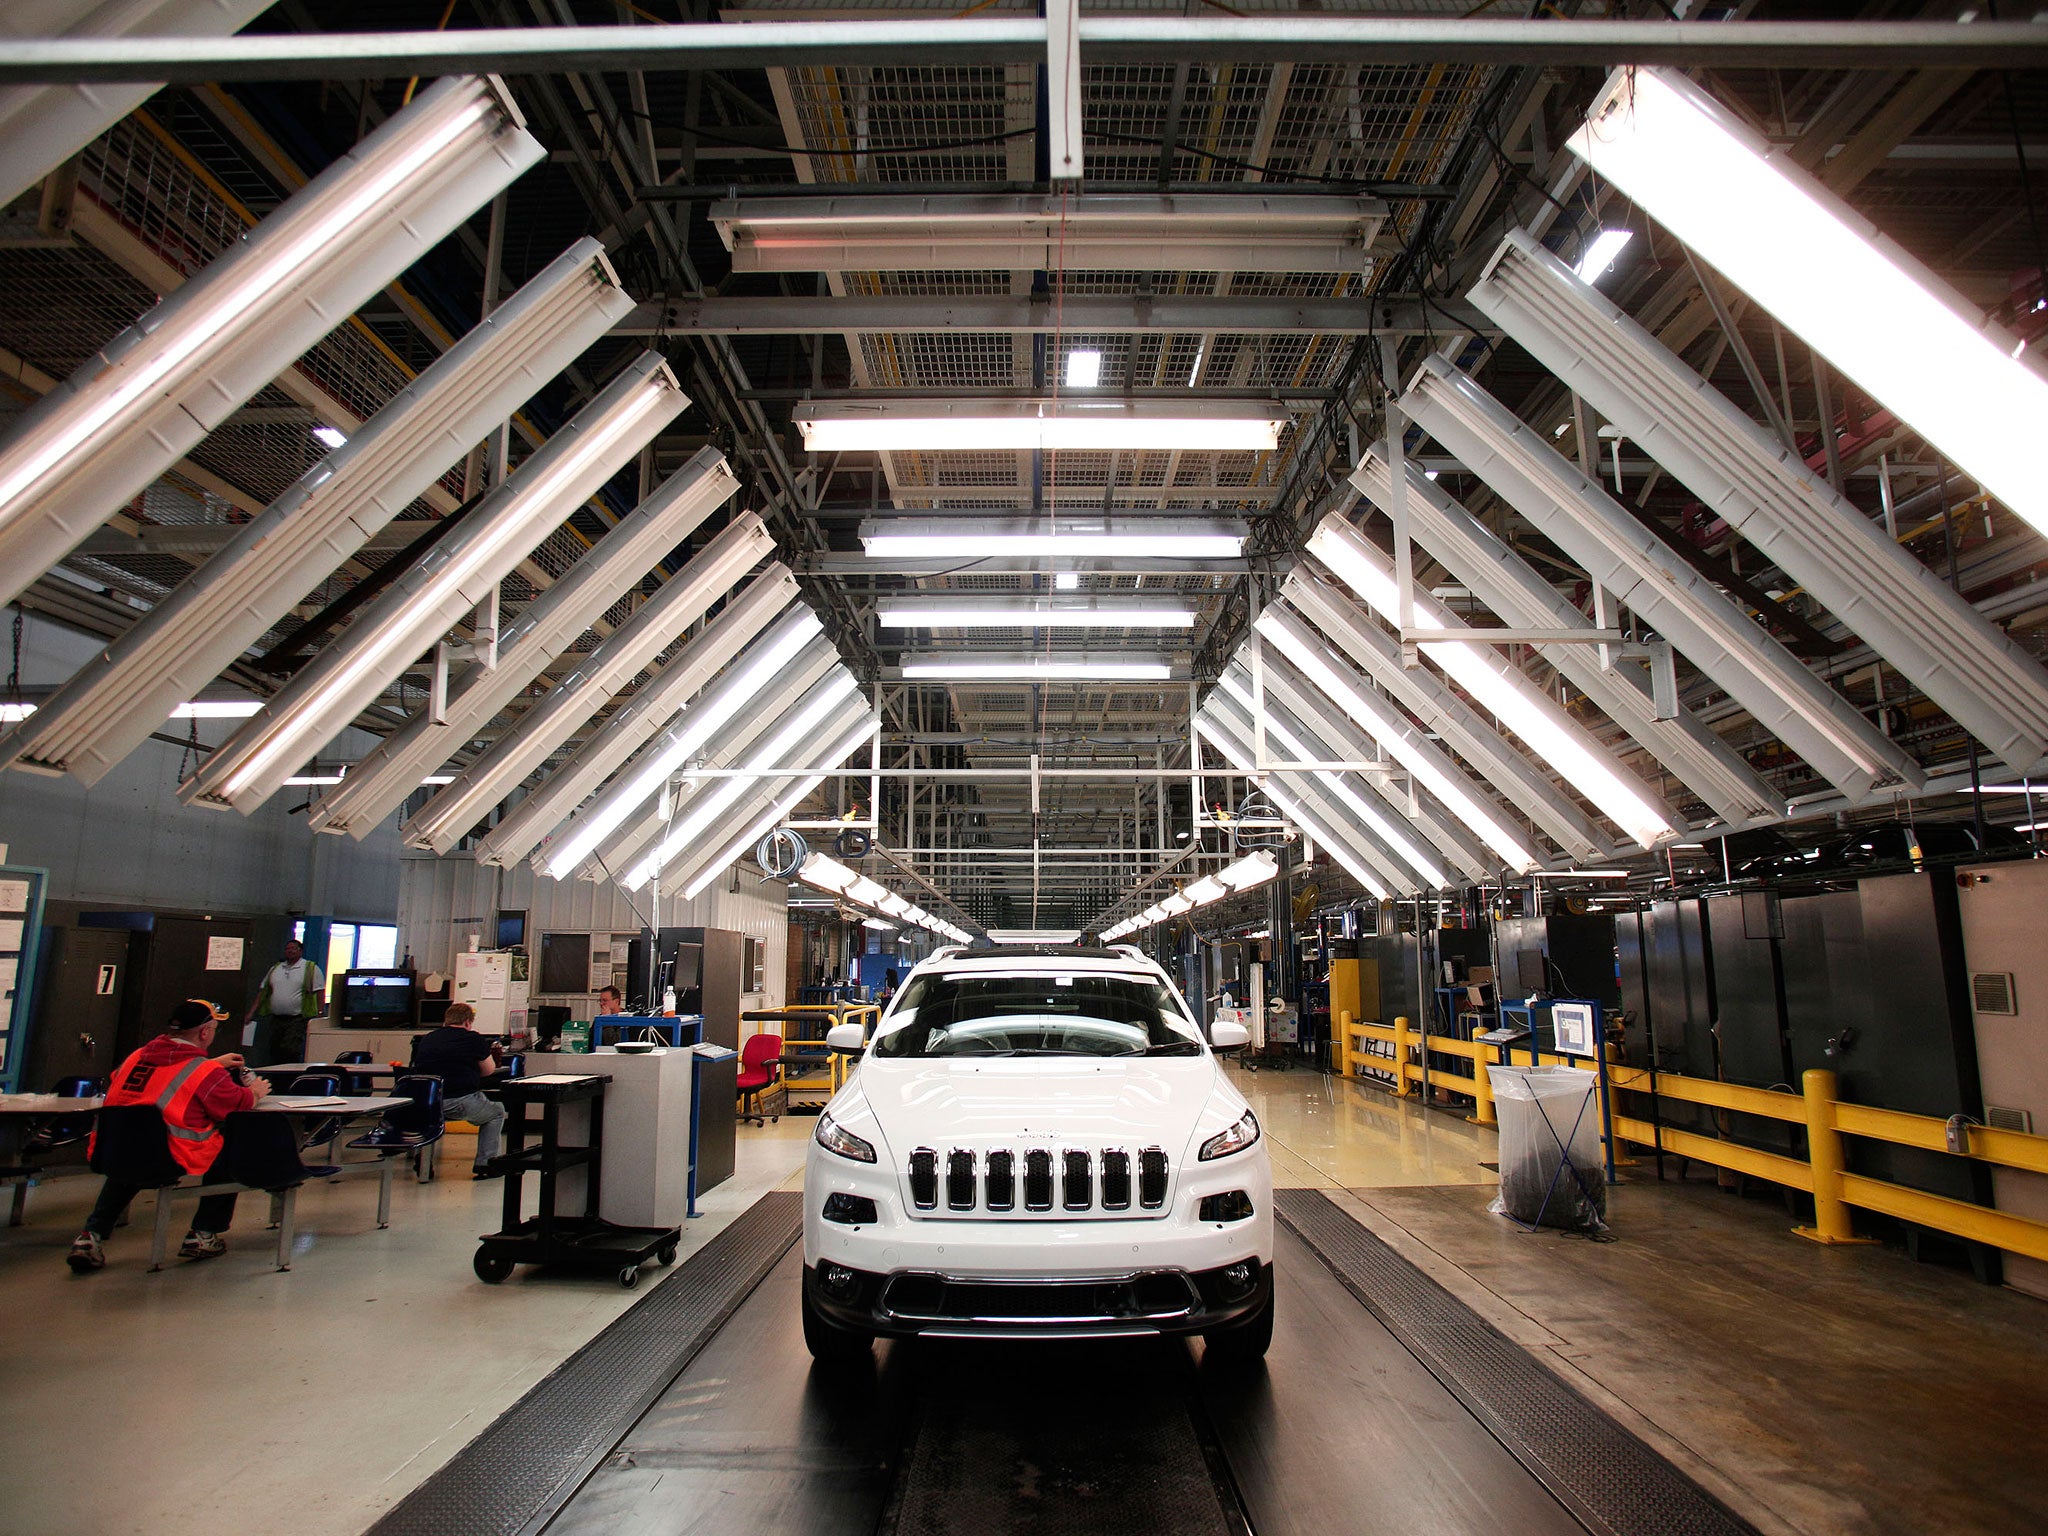 The 2014 Jeep Cherokee undergoes assembly at the Chrysler Toledo North Assembly Plant Jeep May 7, 2014 (Getty)